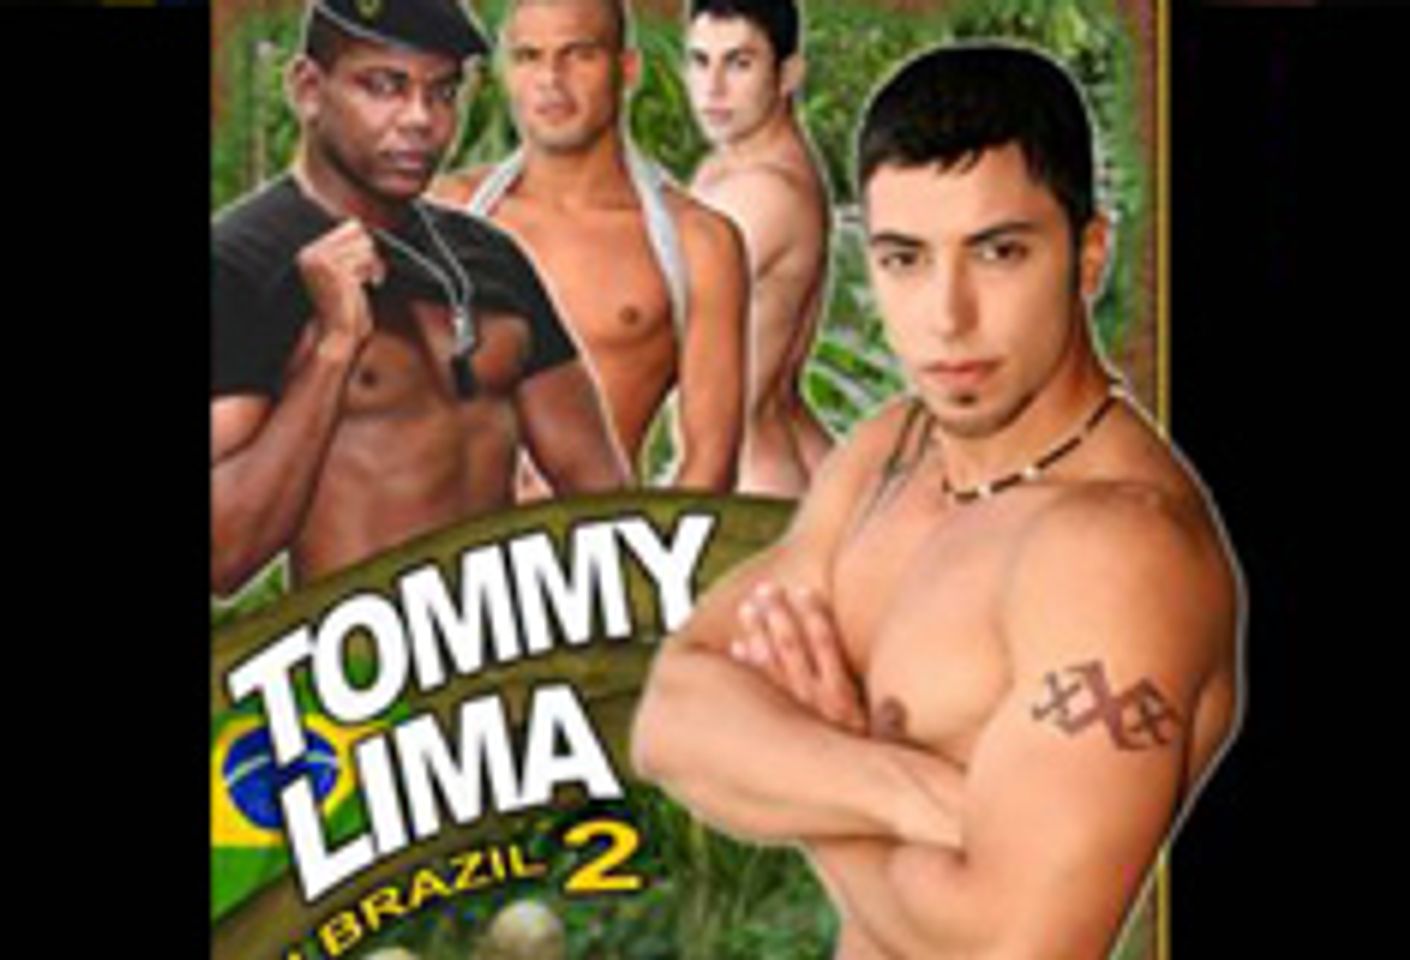 ‘Tommy Lima in Brazil 2' Hits the Streets Oct. 10